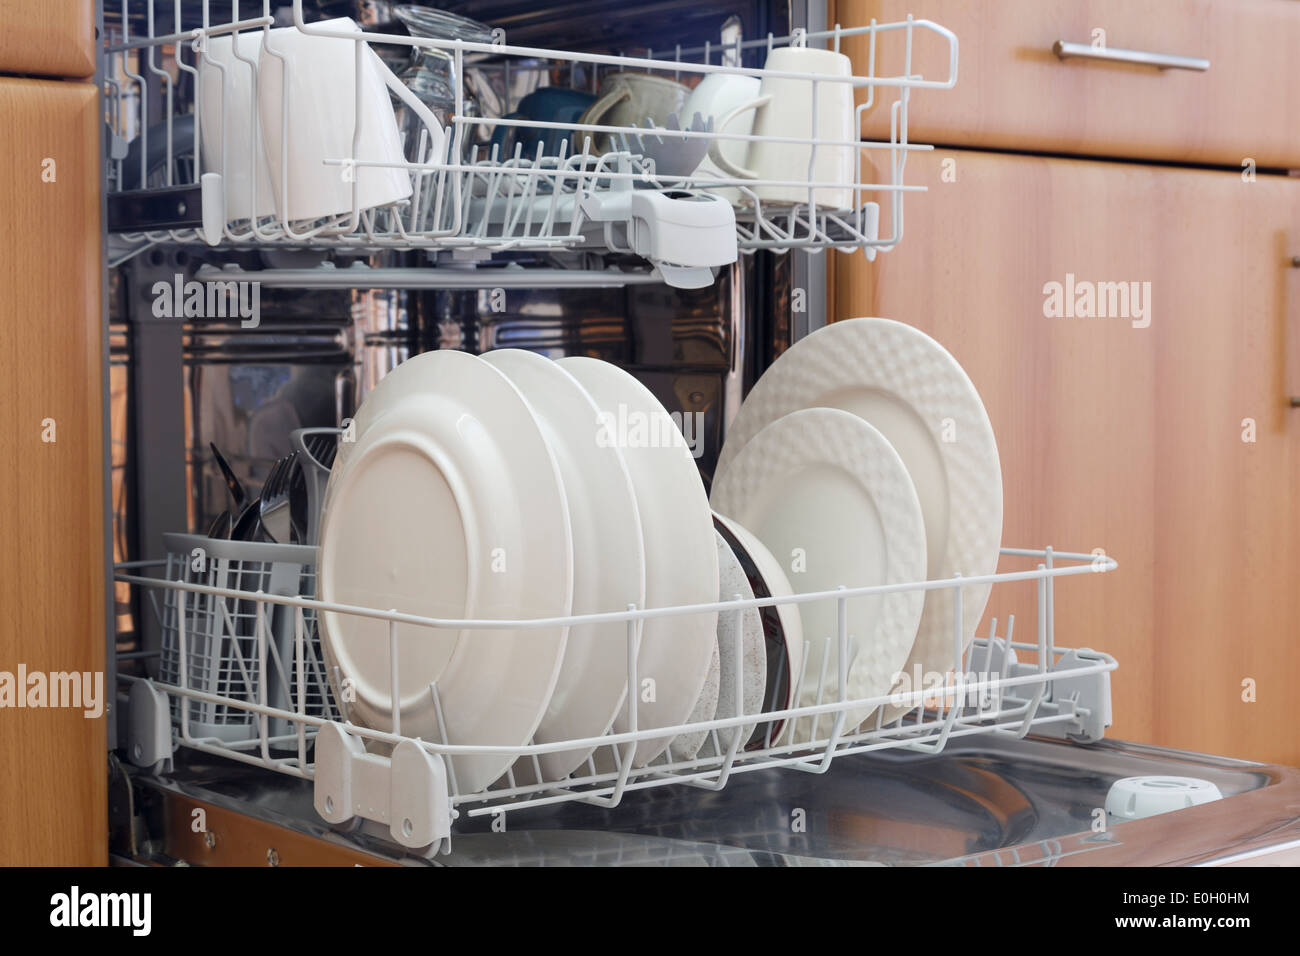 Open fitted dishwasher with clean washed dishes in a kitchen. UK, Britain Stock Photo